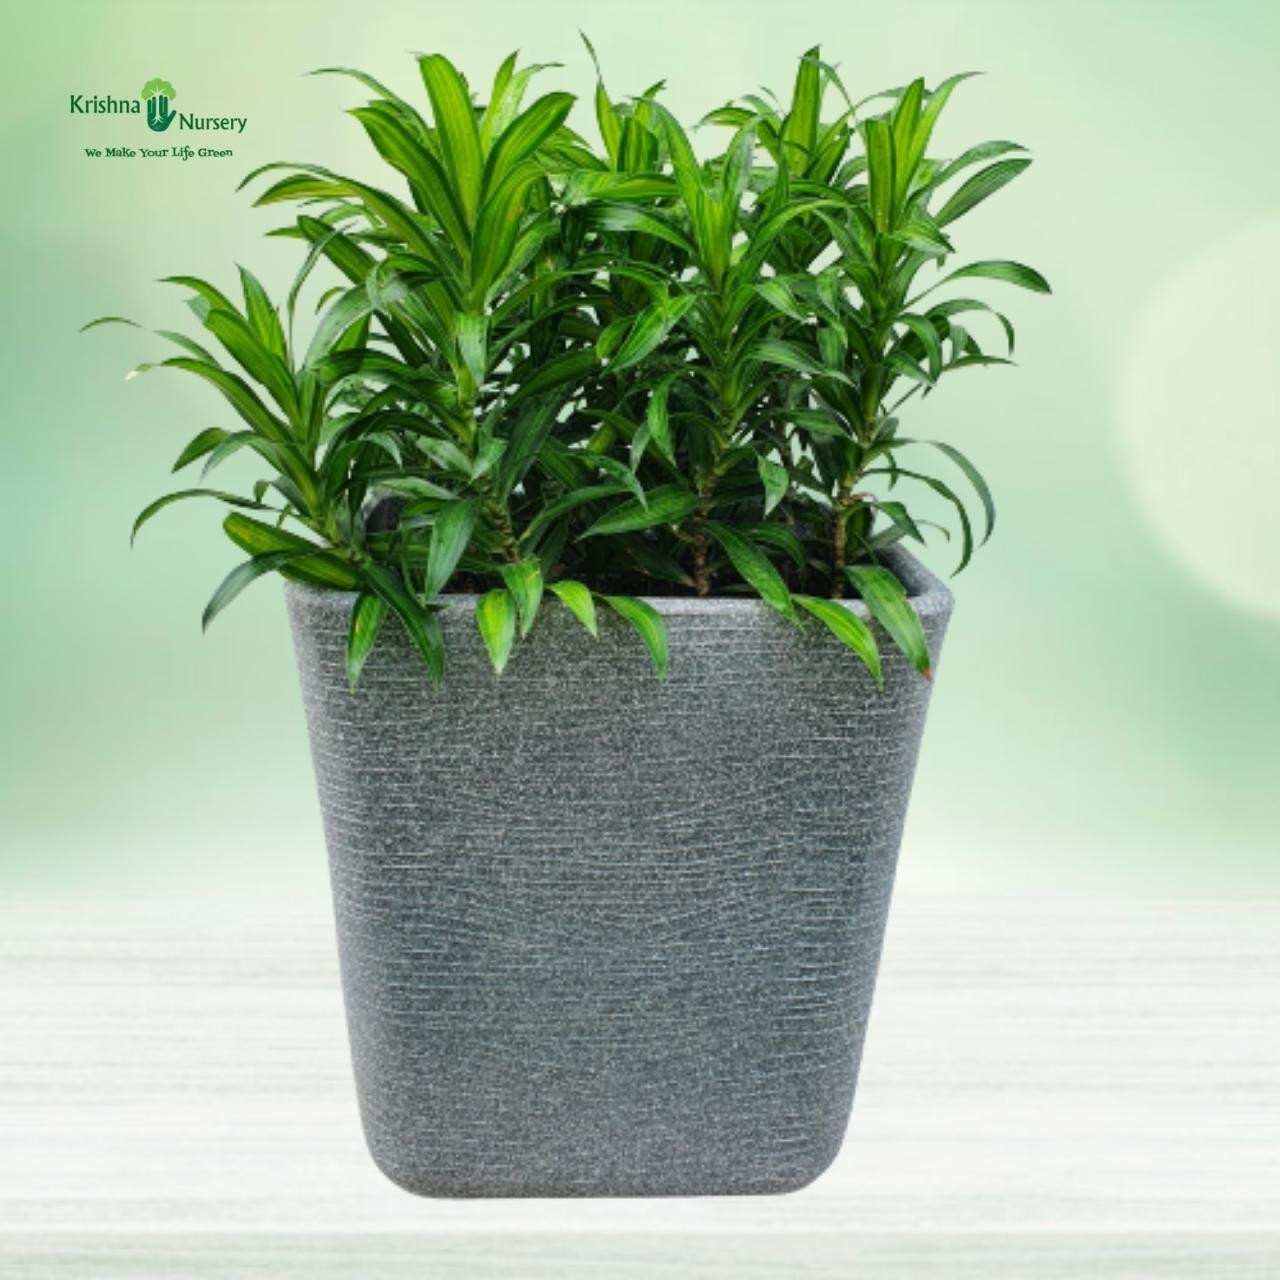 green-song-of-india-with-designer-pot